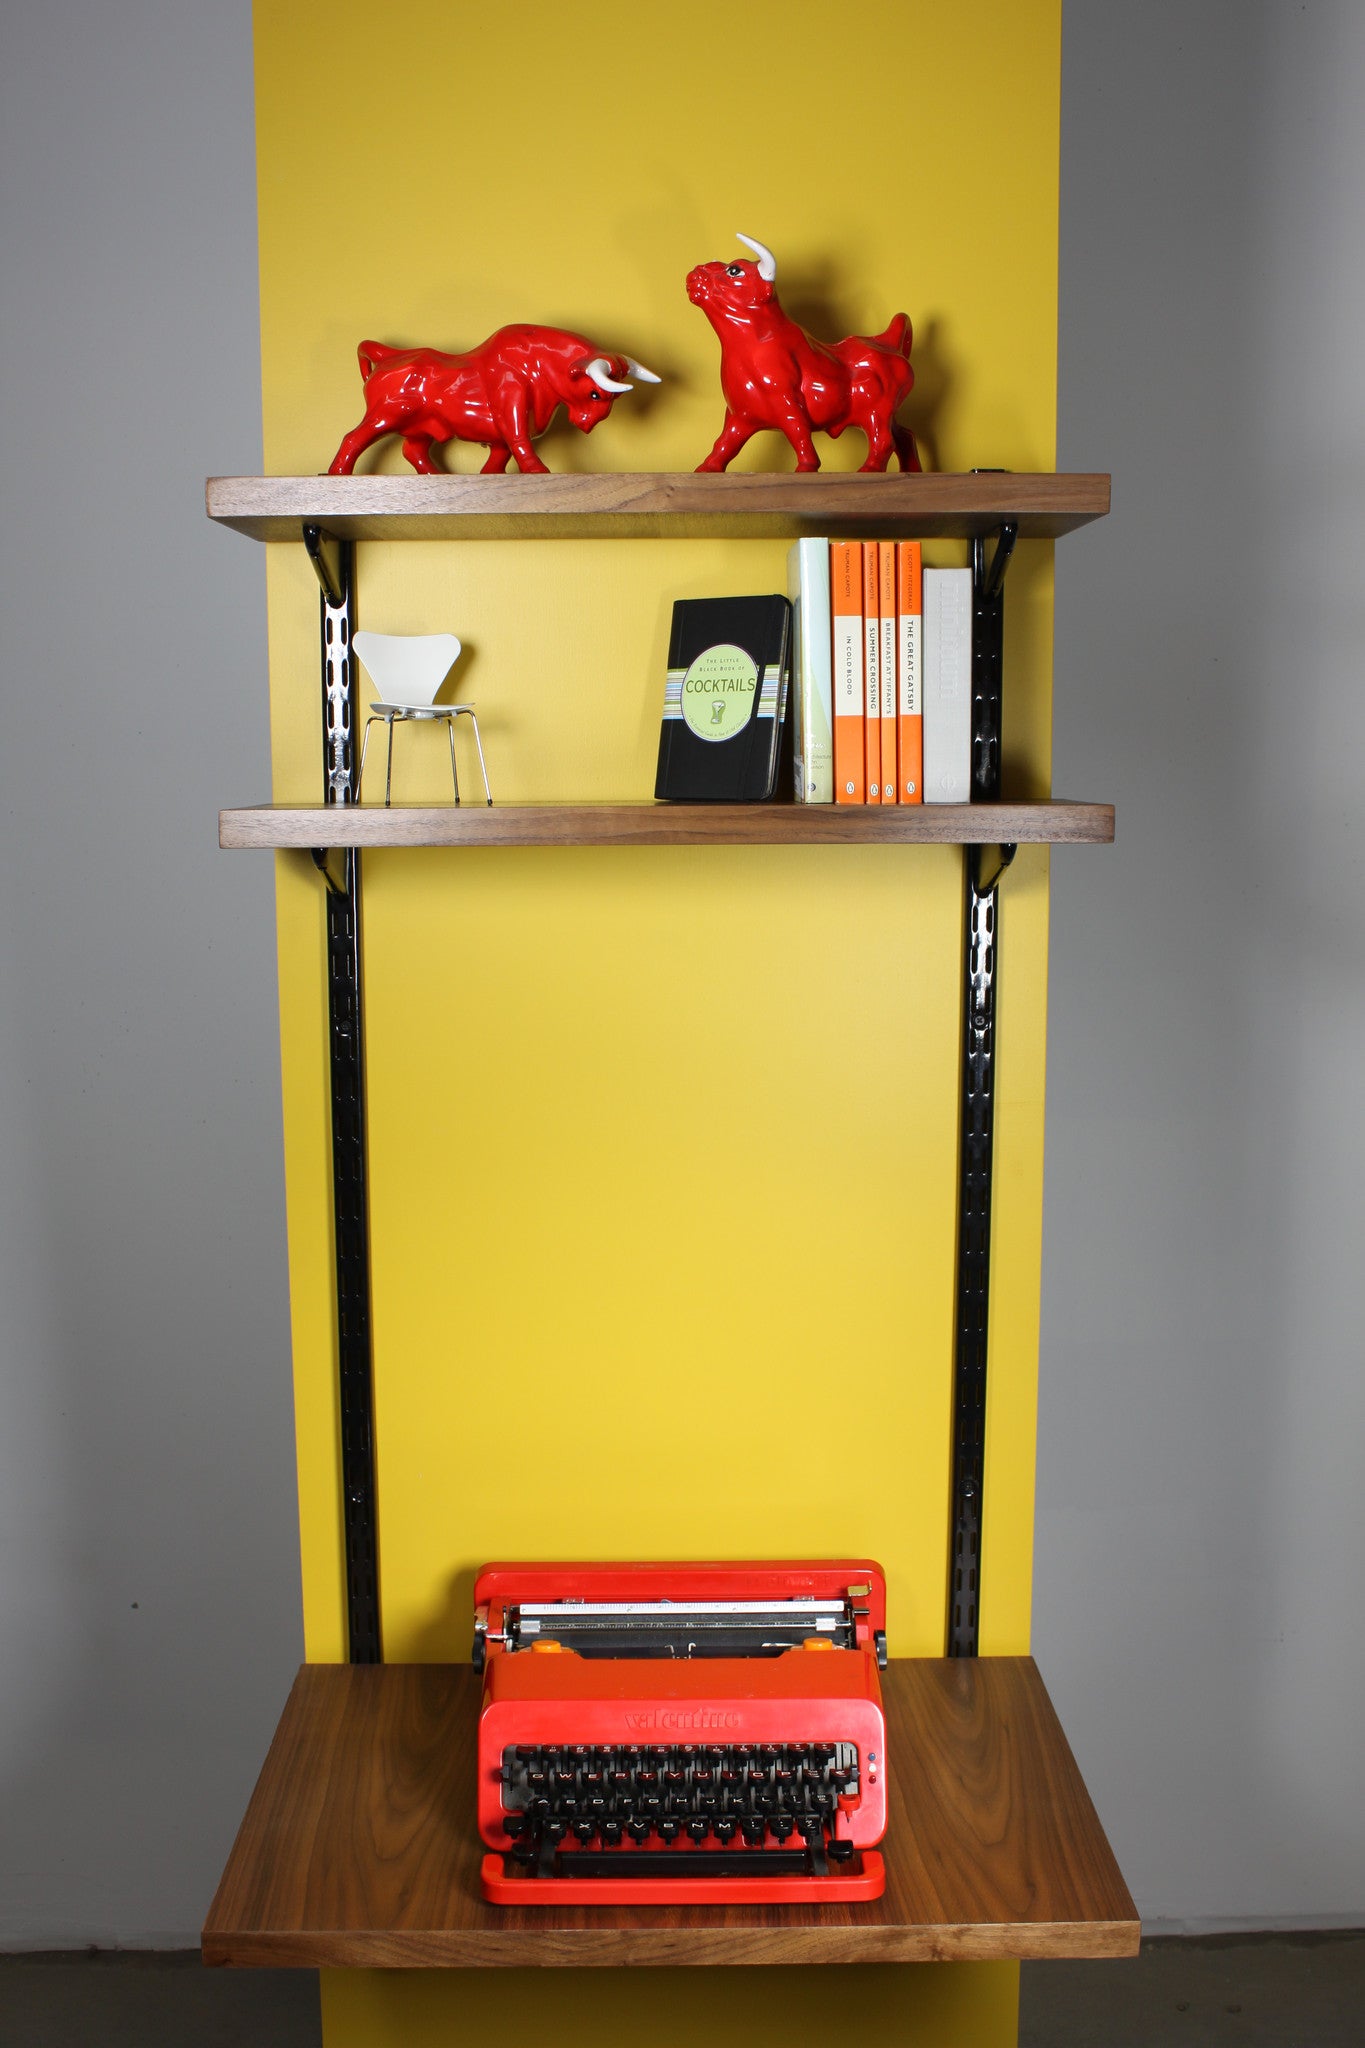 Wallhung shelving unit and desk - Case 22